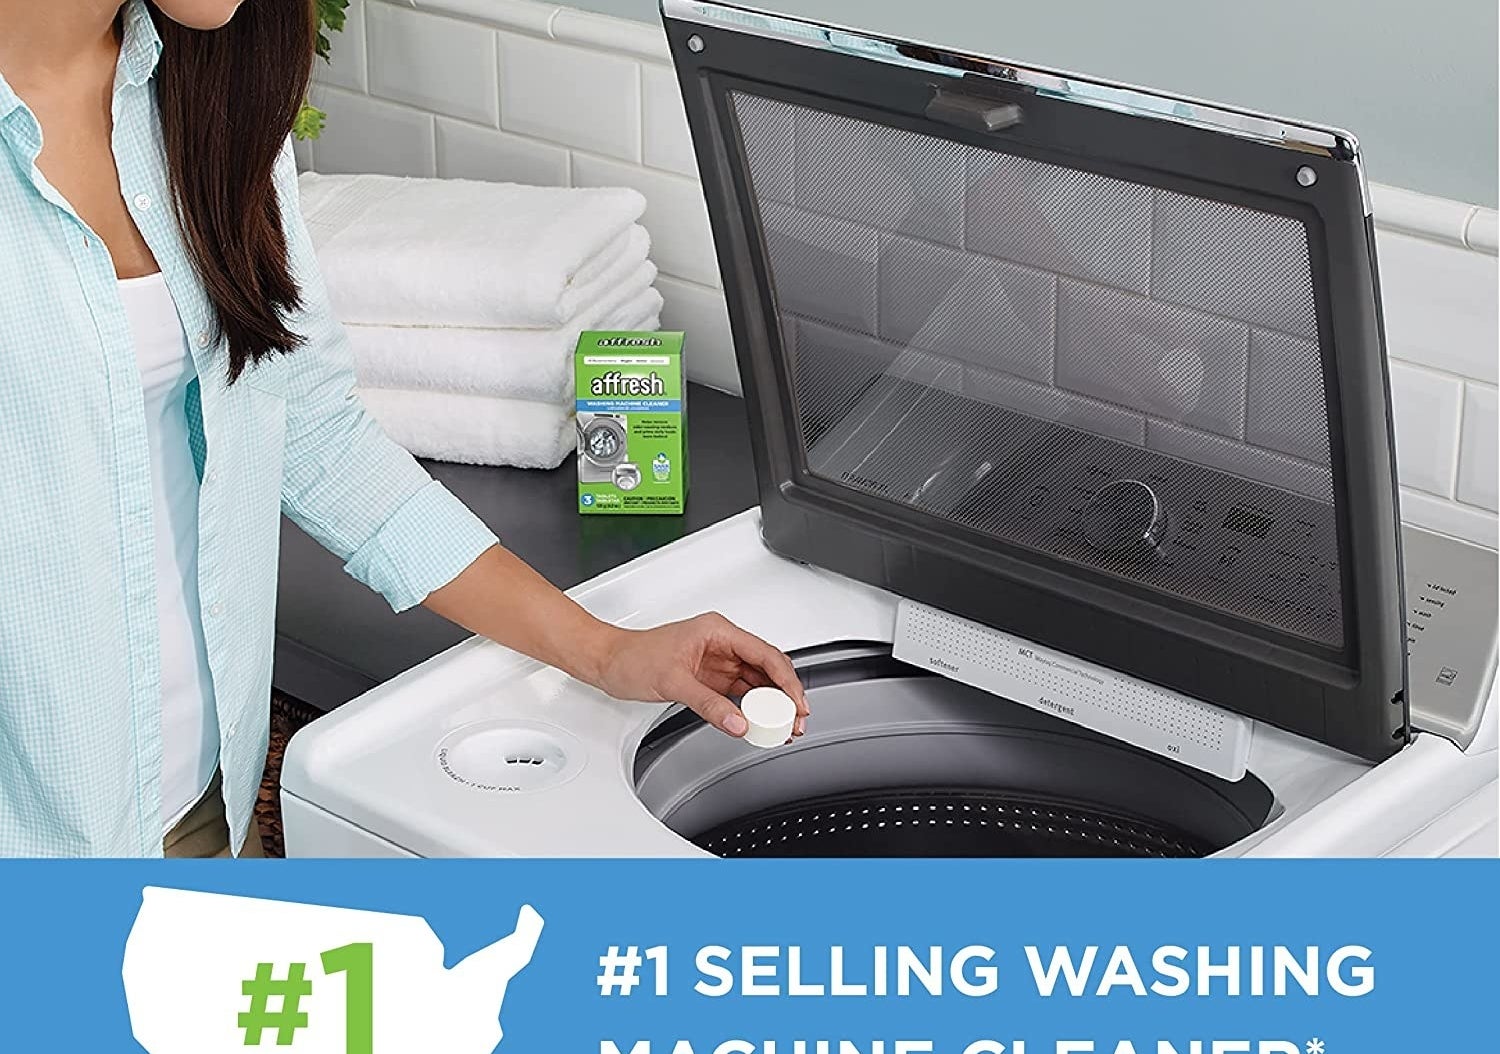 models hand dropping 1/4c-ish size tablet into washer